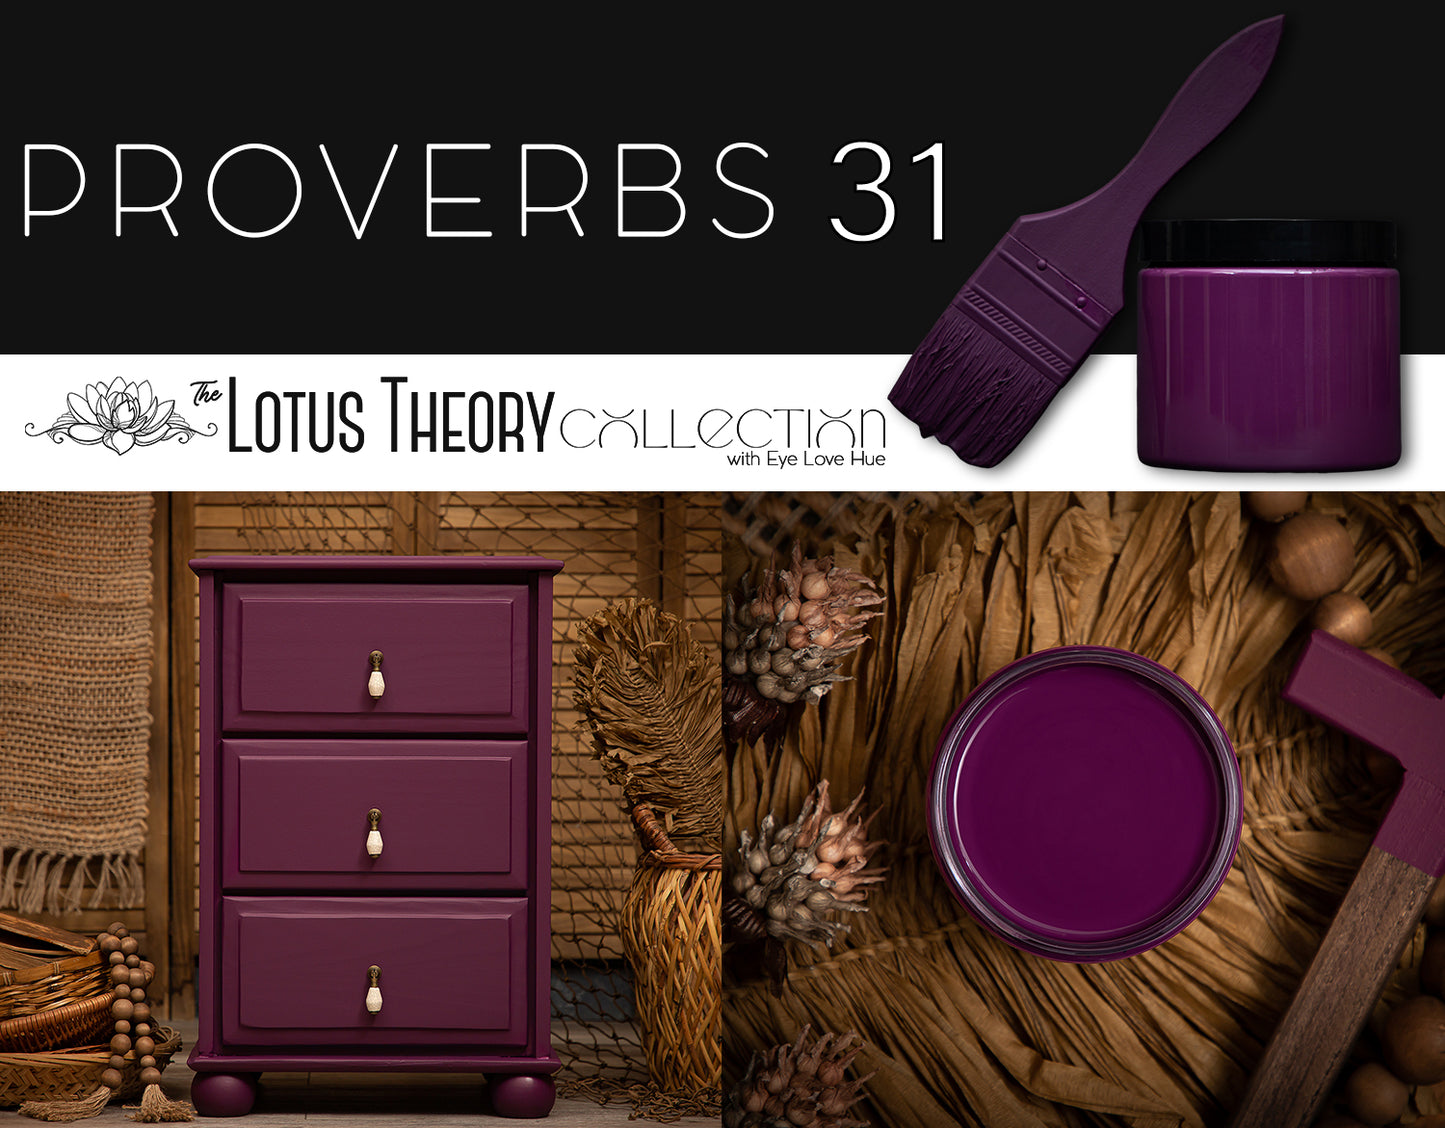 Eye Love Hue - The Lotus Theory Collection